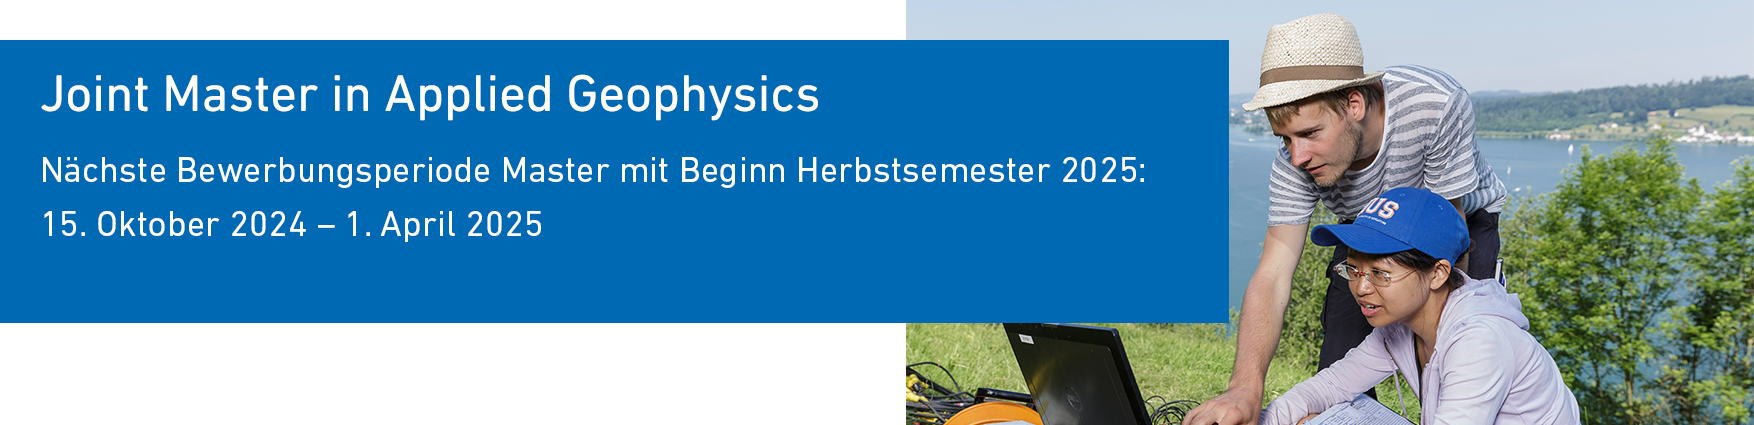 Joint Master in Applied Geophysics